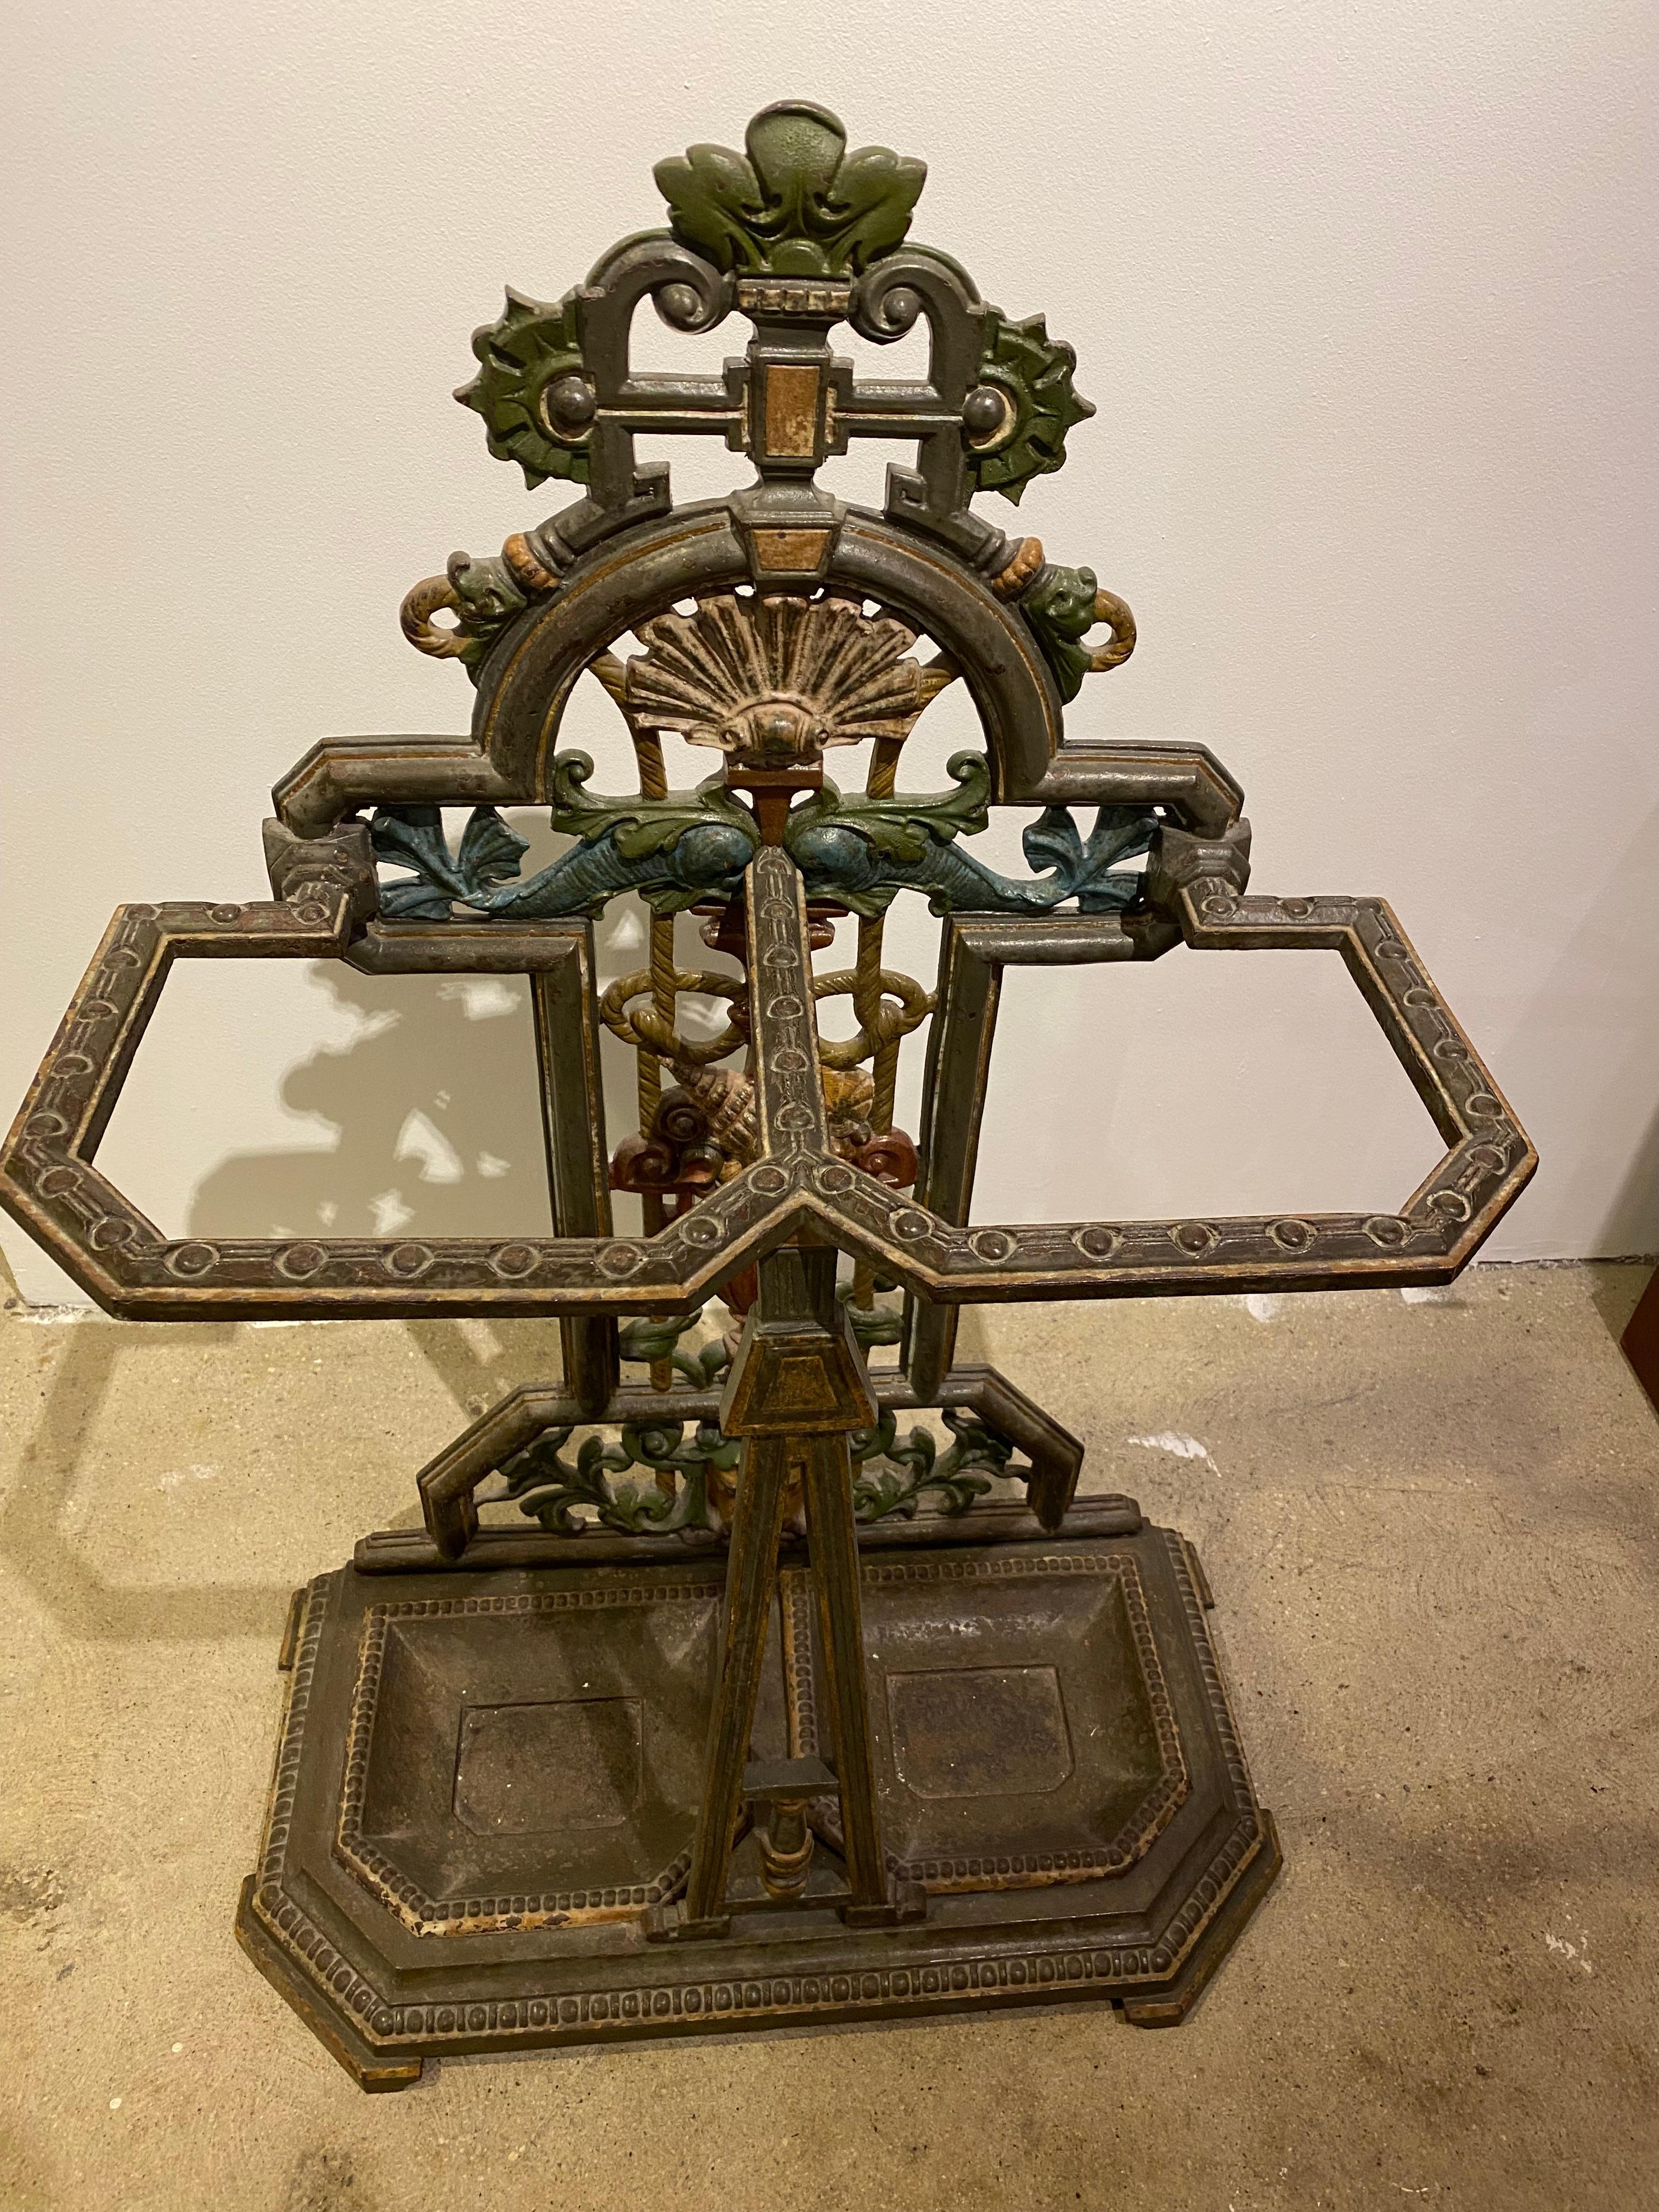 Superb and Unique 19th Century Hand Decorated (Original Paint) Cast Iron Shell & Dolphin Umbrella Stand from England.  Bottom Drip Trays are Removable. 
Circa 1860.  